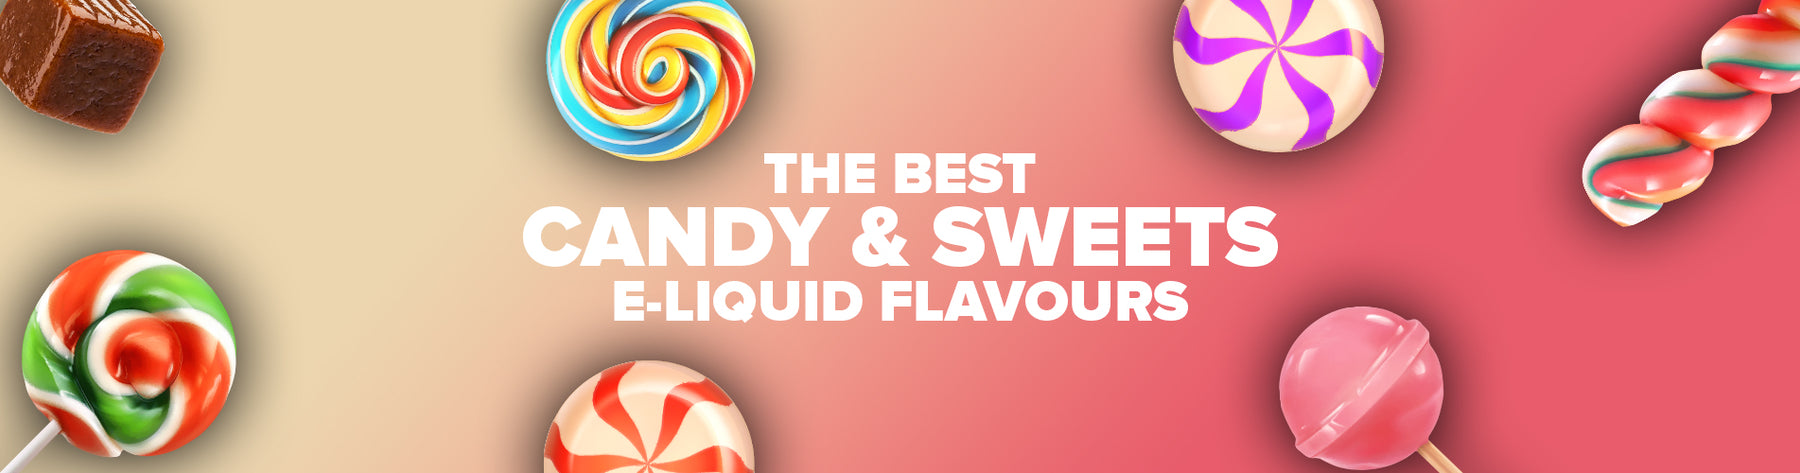 The Best Candy & Sweets E-Liquid Flavours